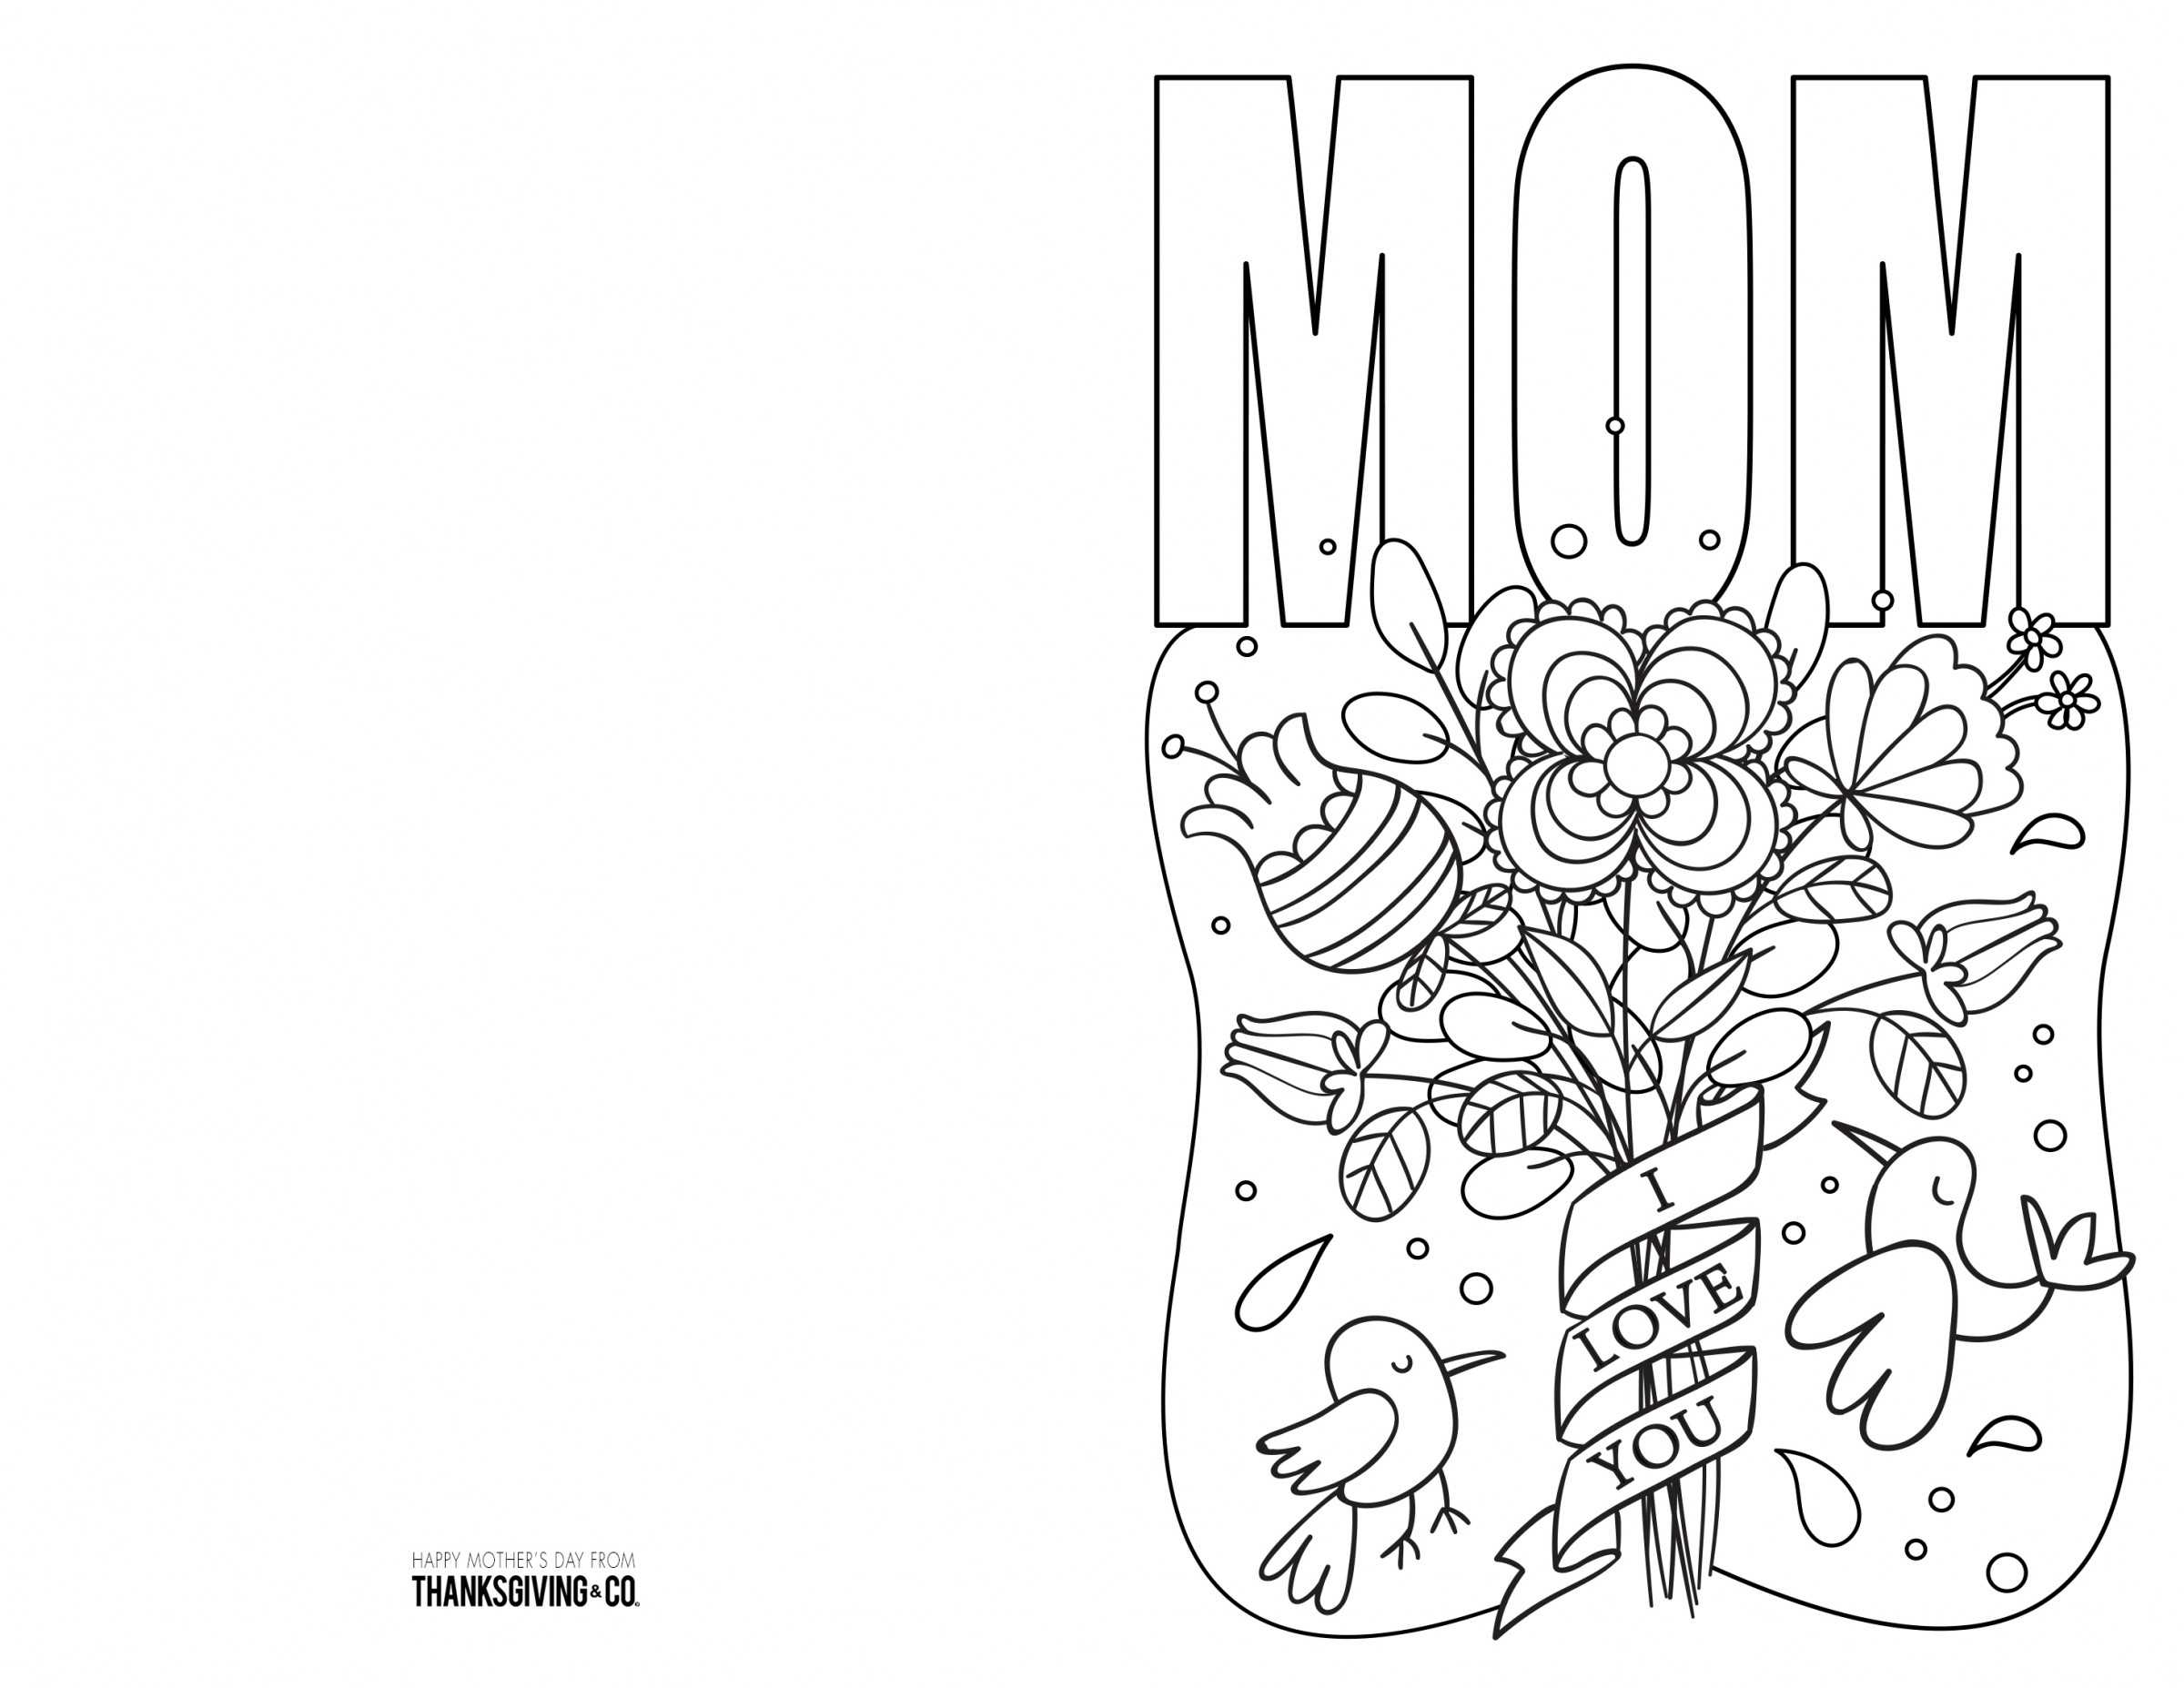 Coloring Pages : Free Printable Mothers Day Ecards To Color For Mothers Day Card Templates